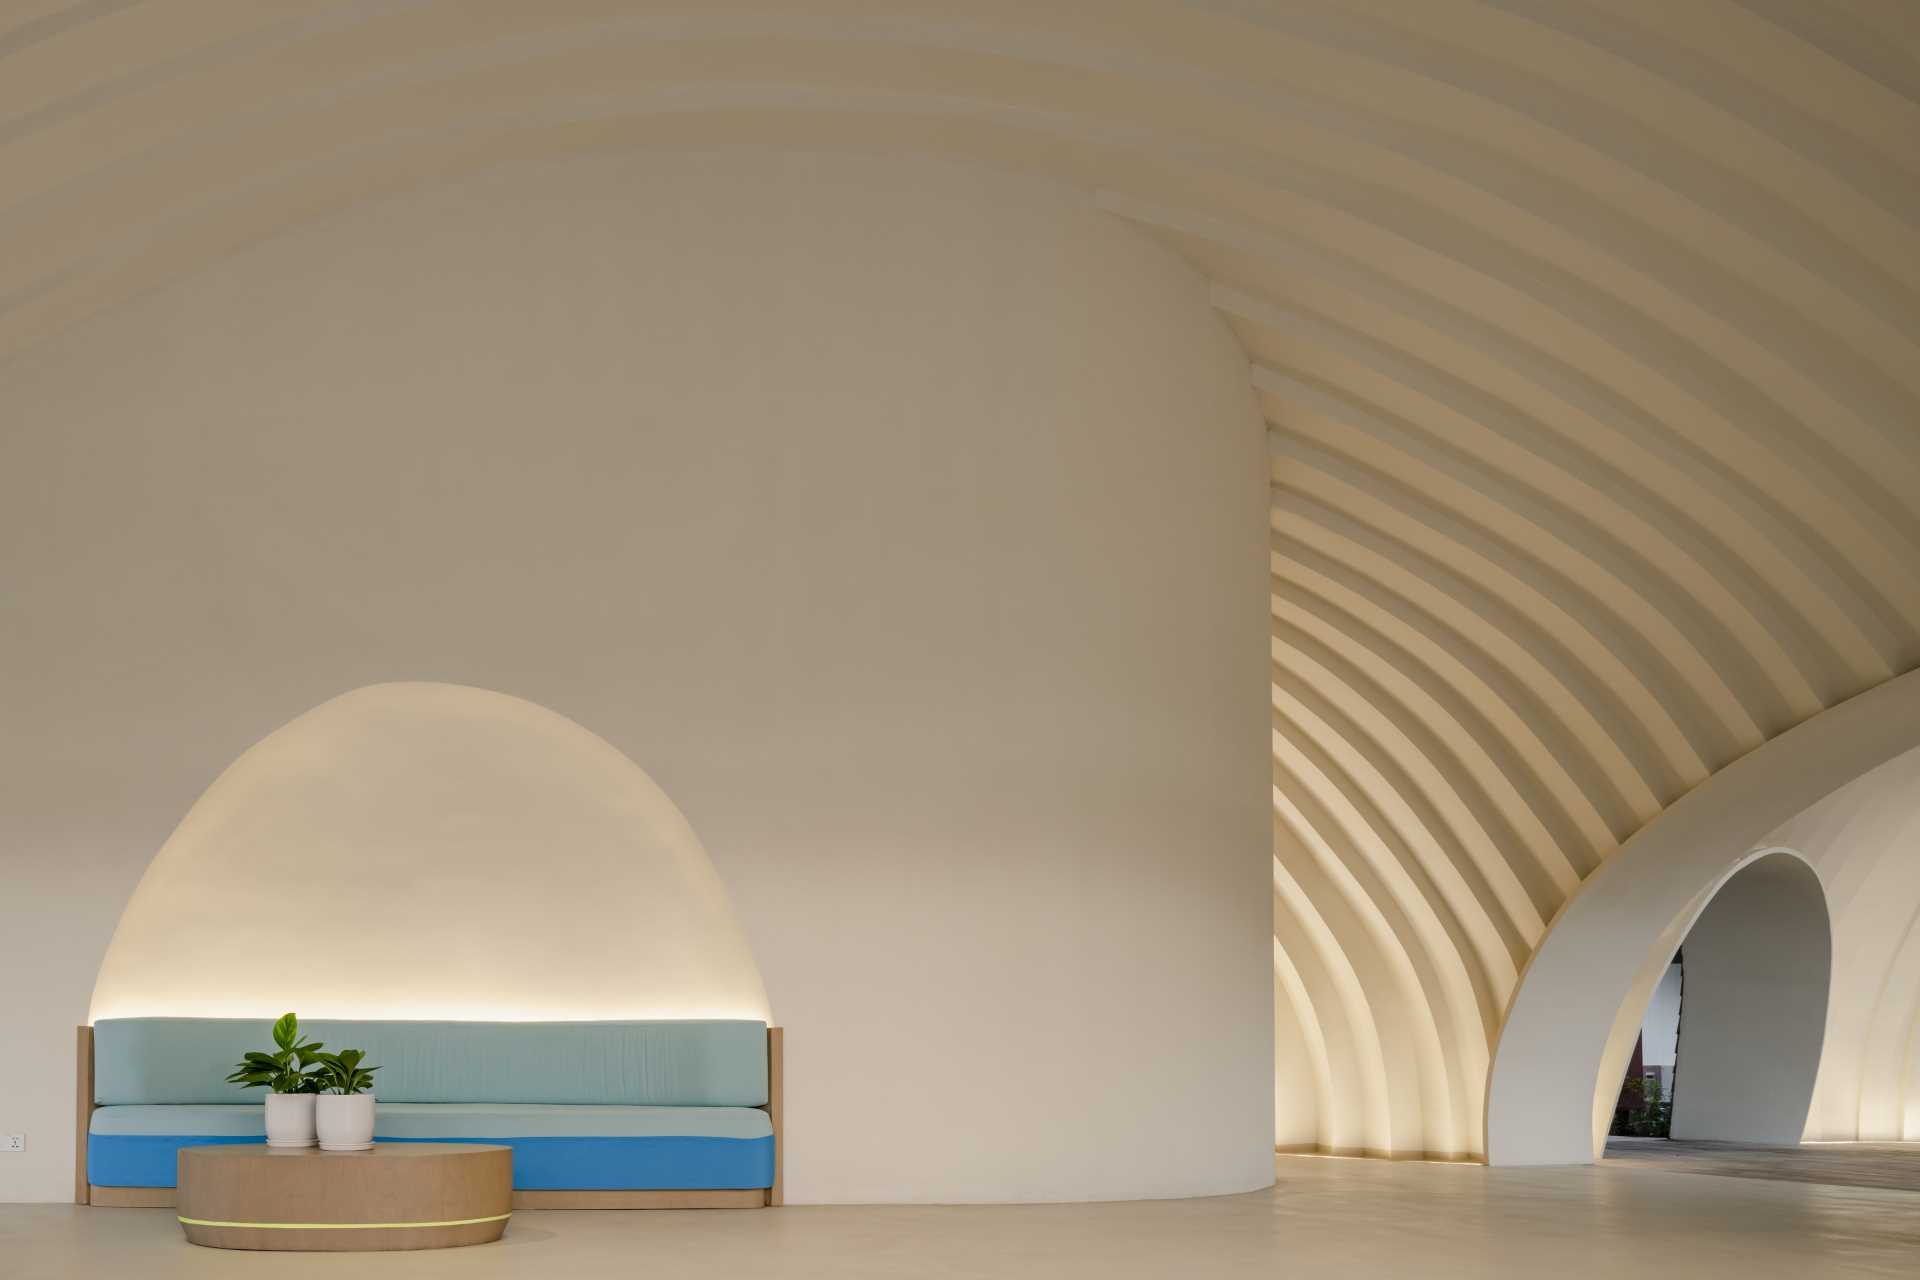 A modern hotel lobby with a curved design.